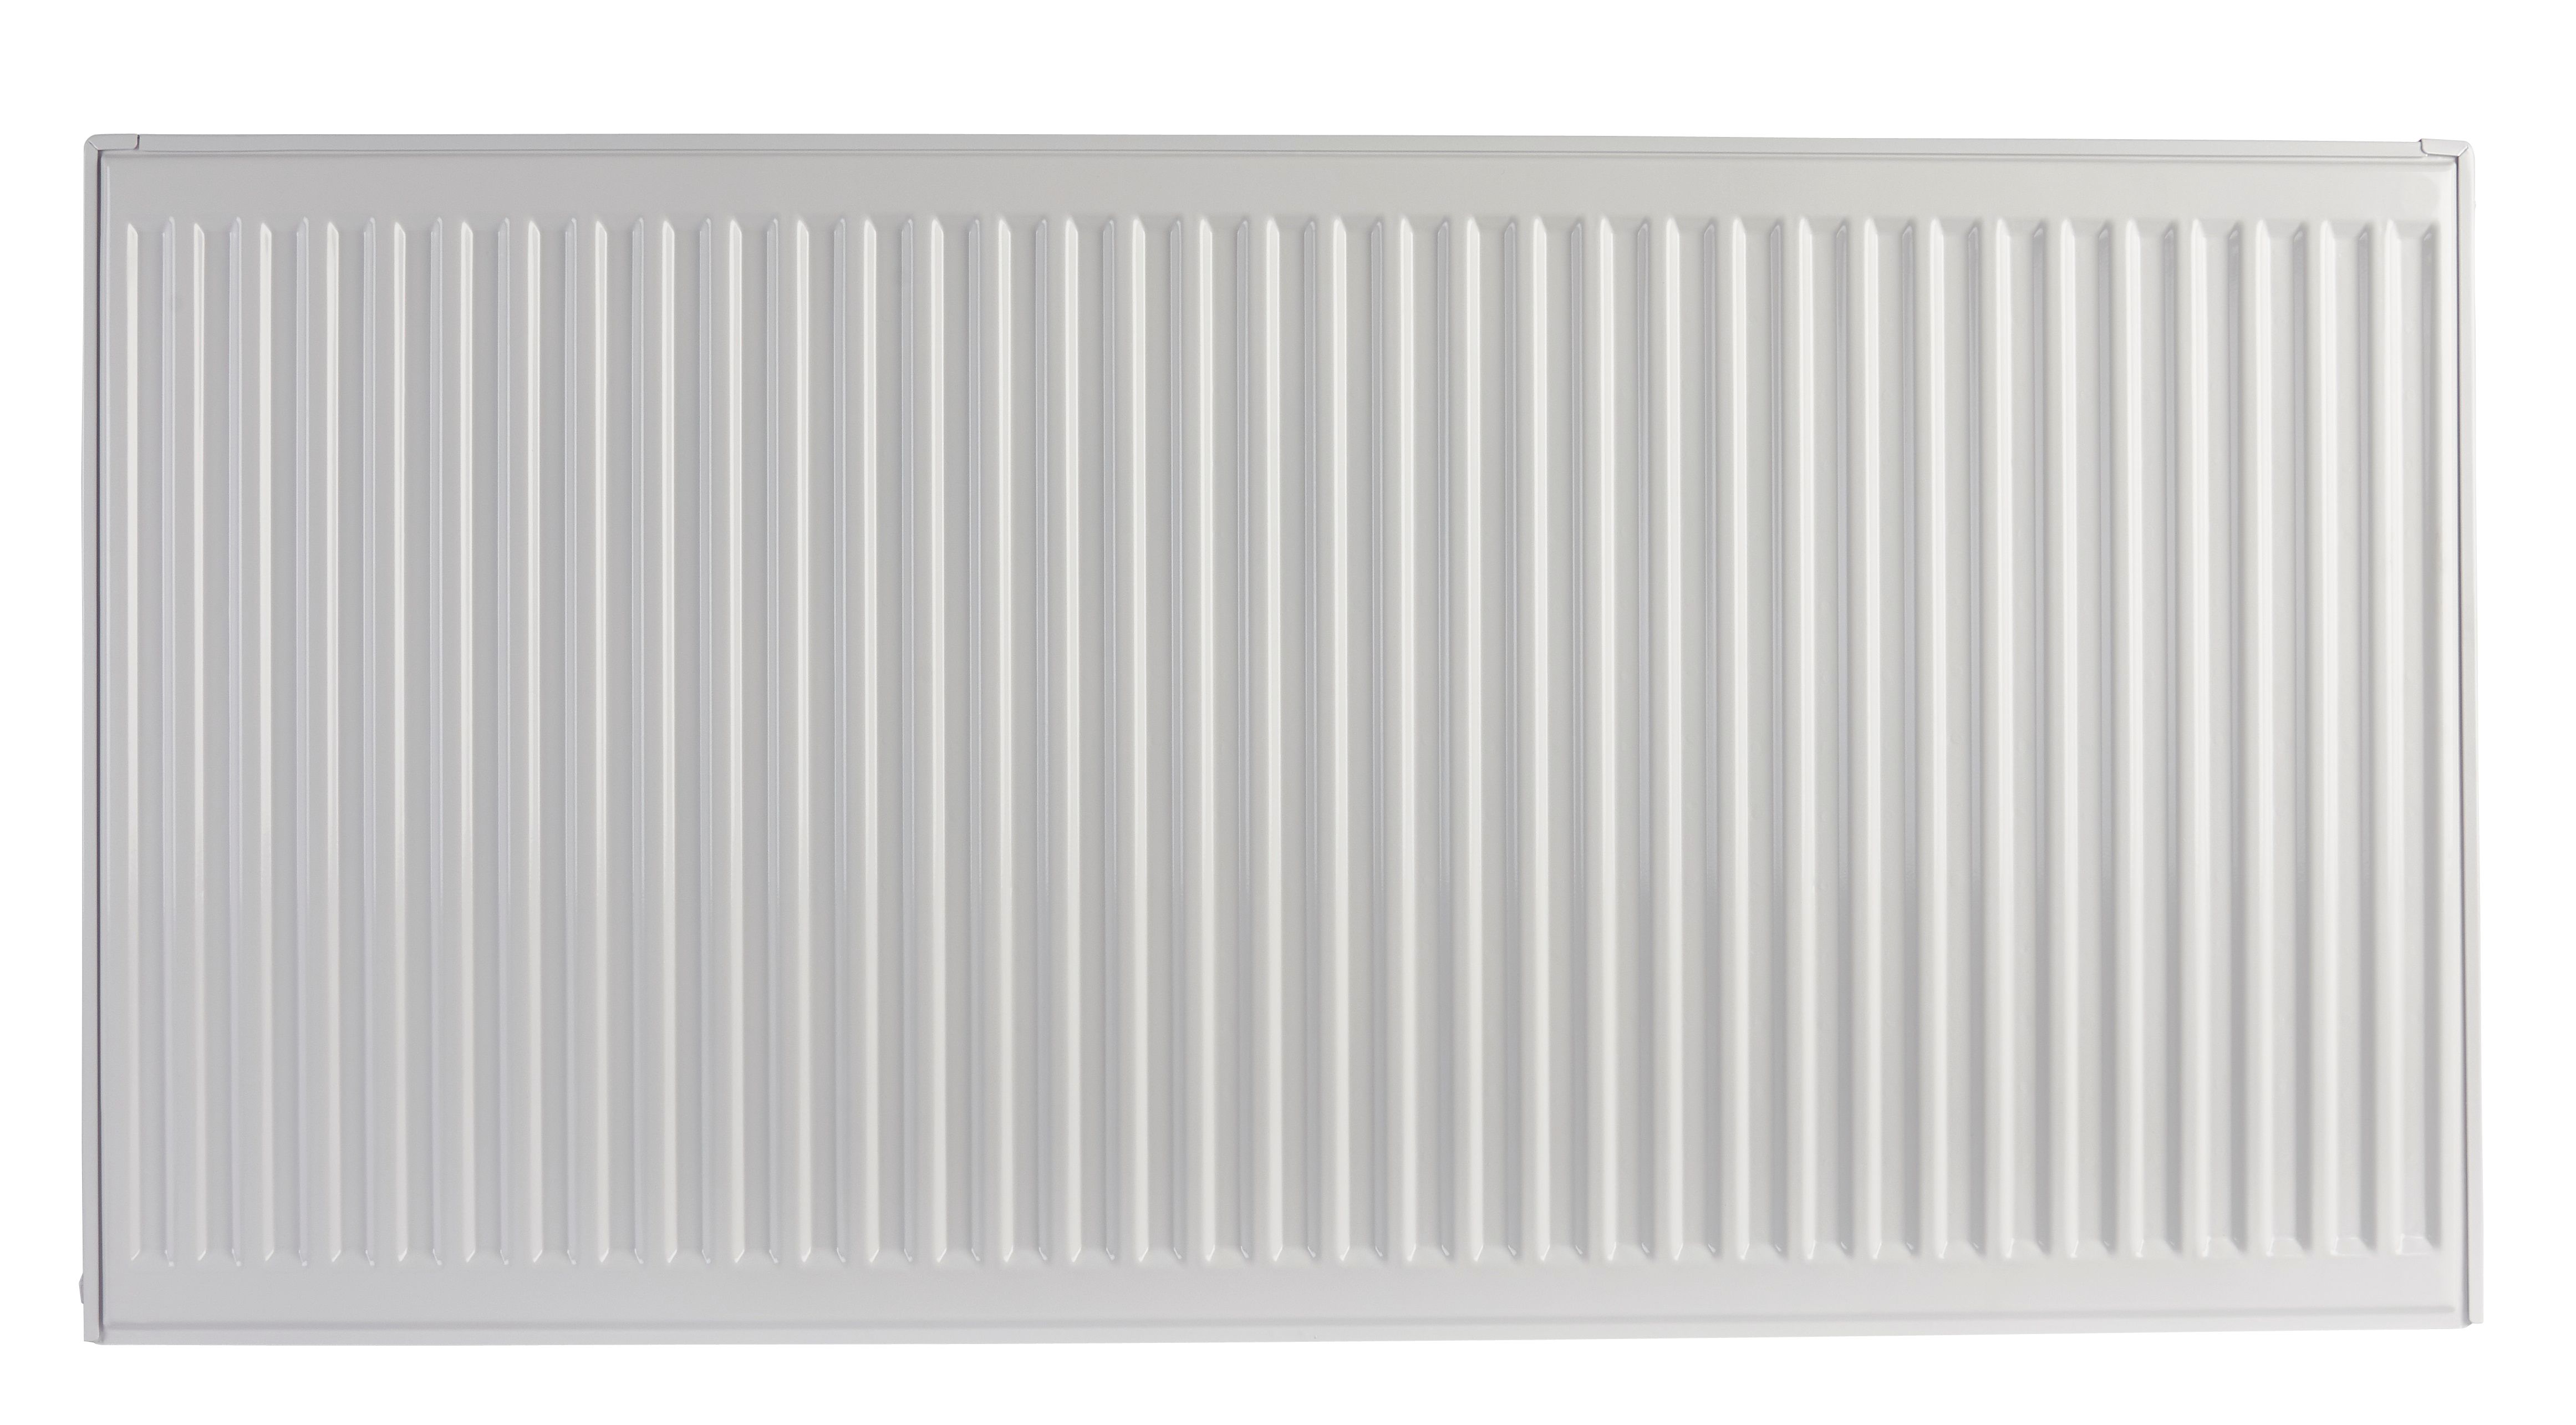 Homeline by Stelrad 600 x 1600mm Type 21 Double Panel Plus Single Convector Radiator